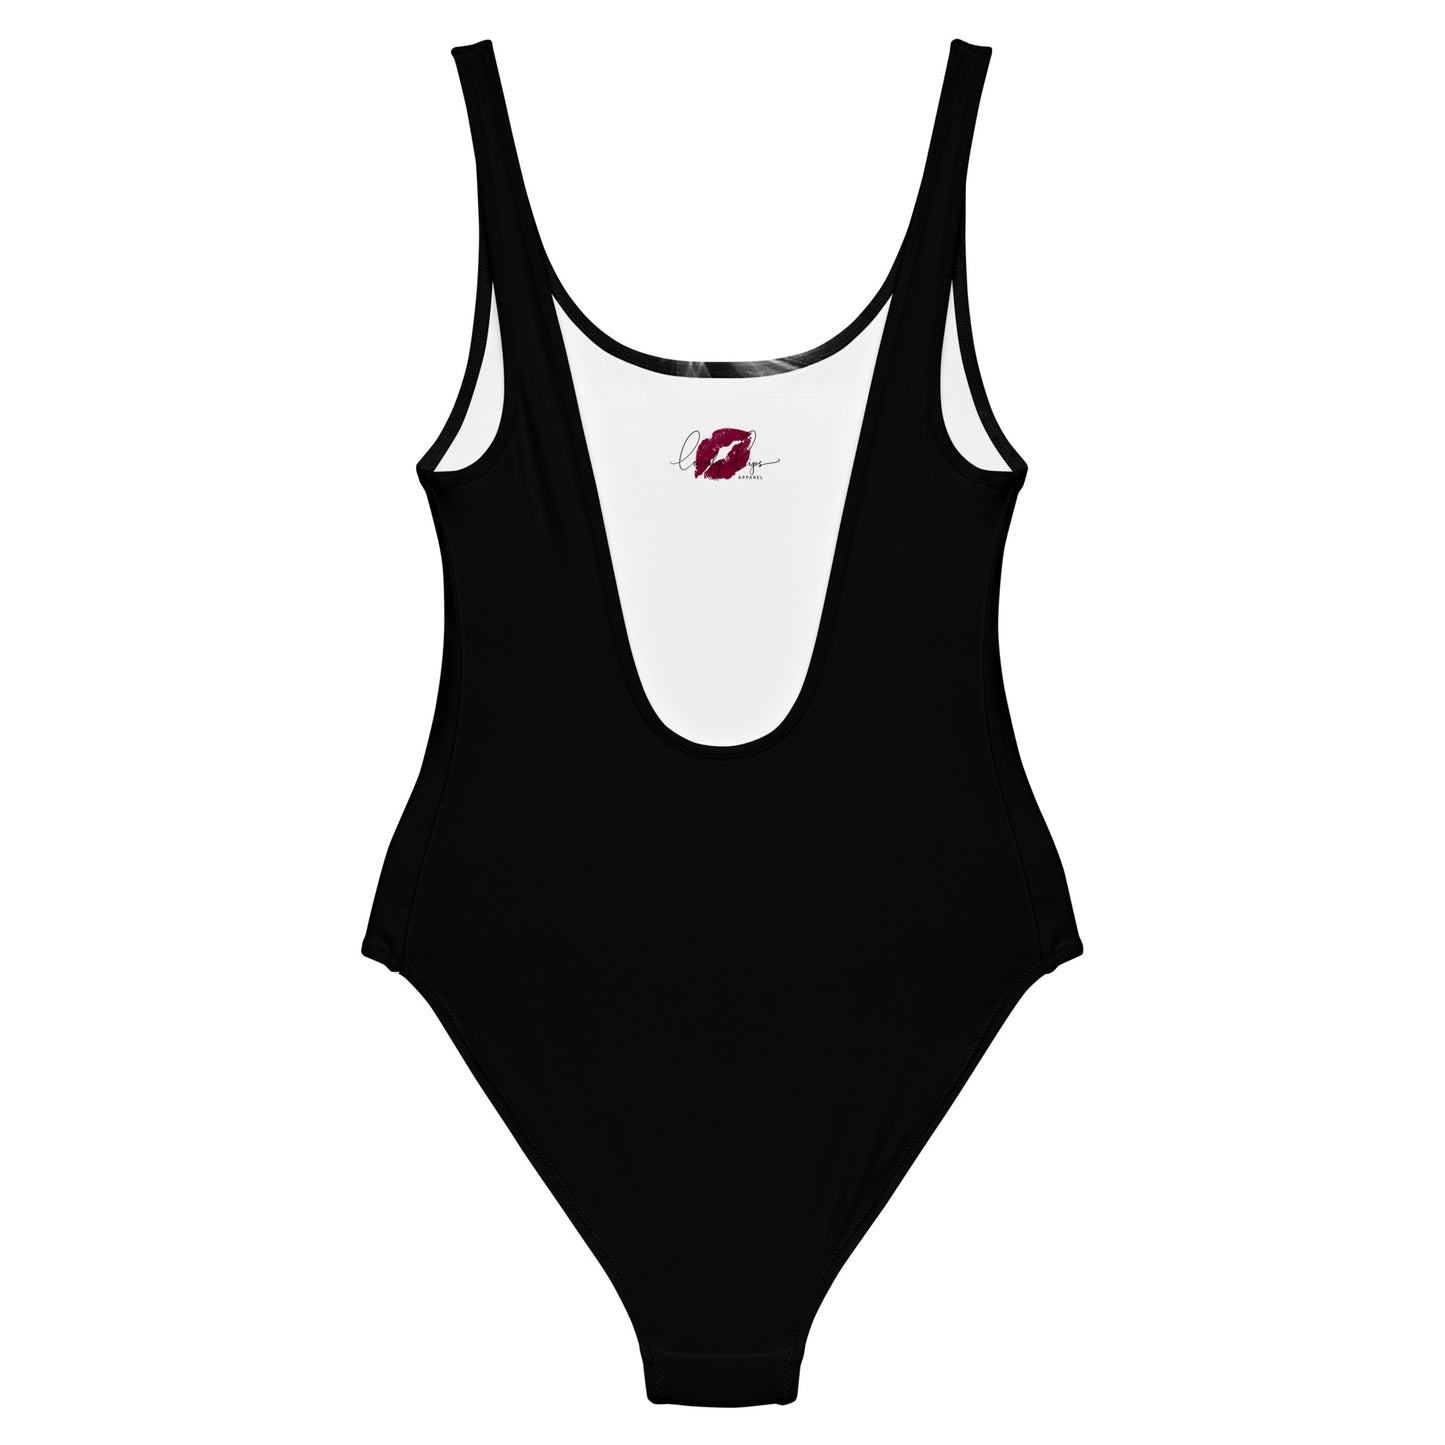 ROUGHCHIK FADE TO BLACK One-Piece Swimsuit